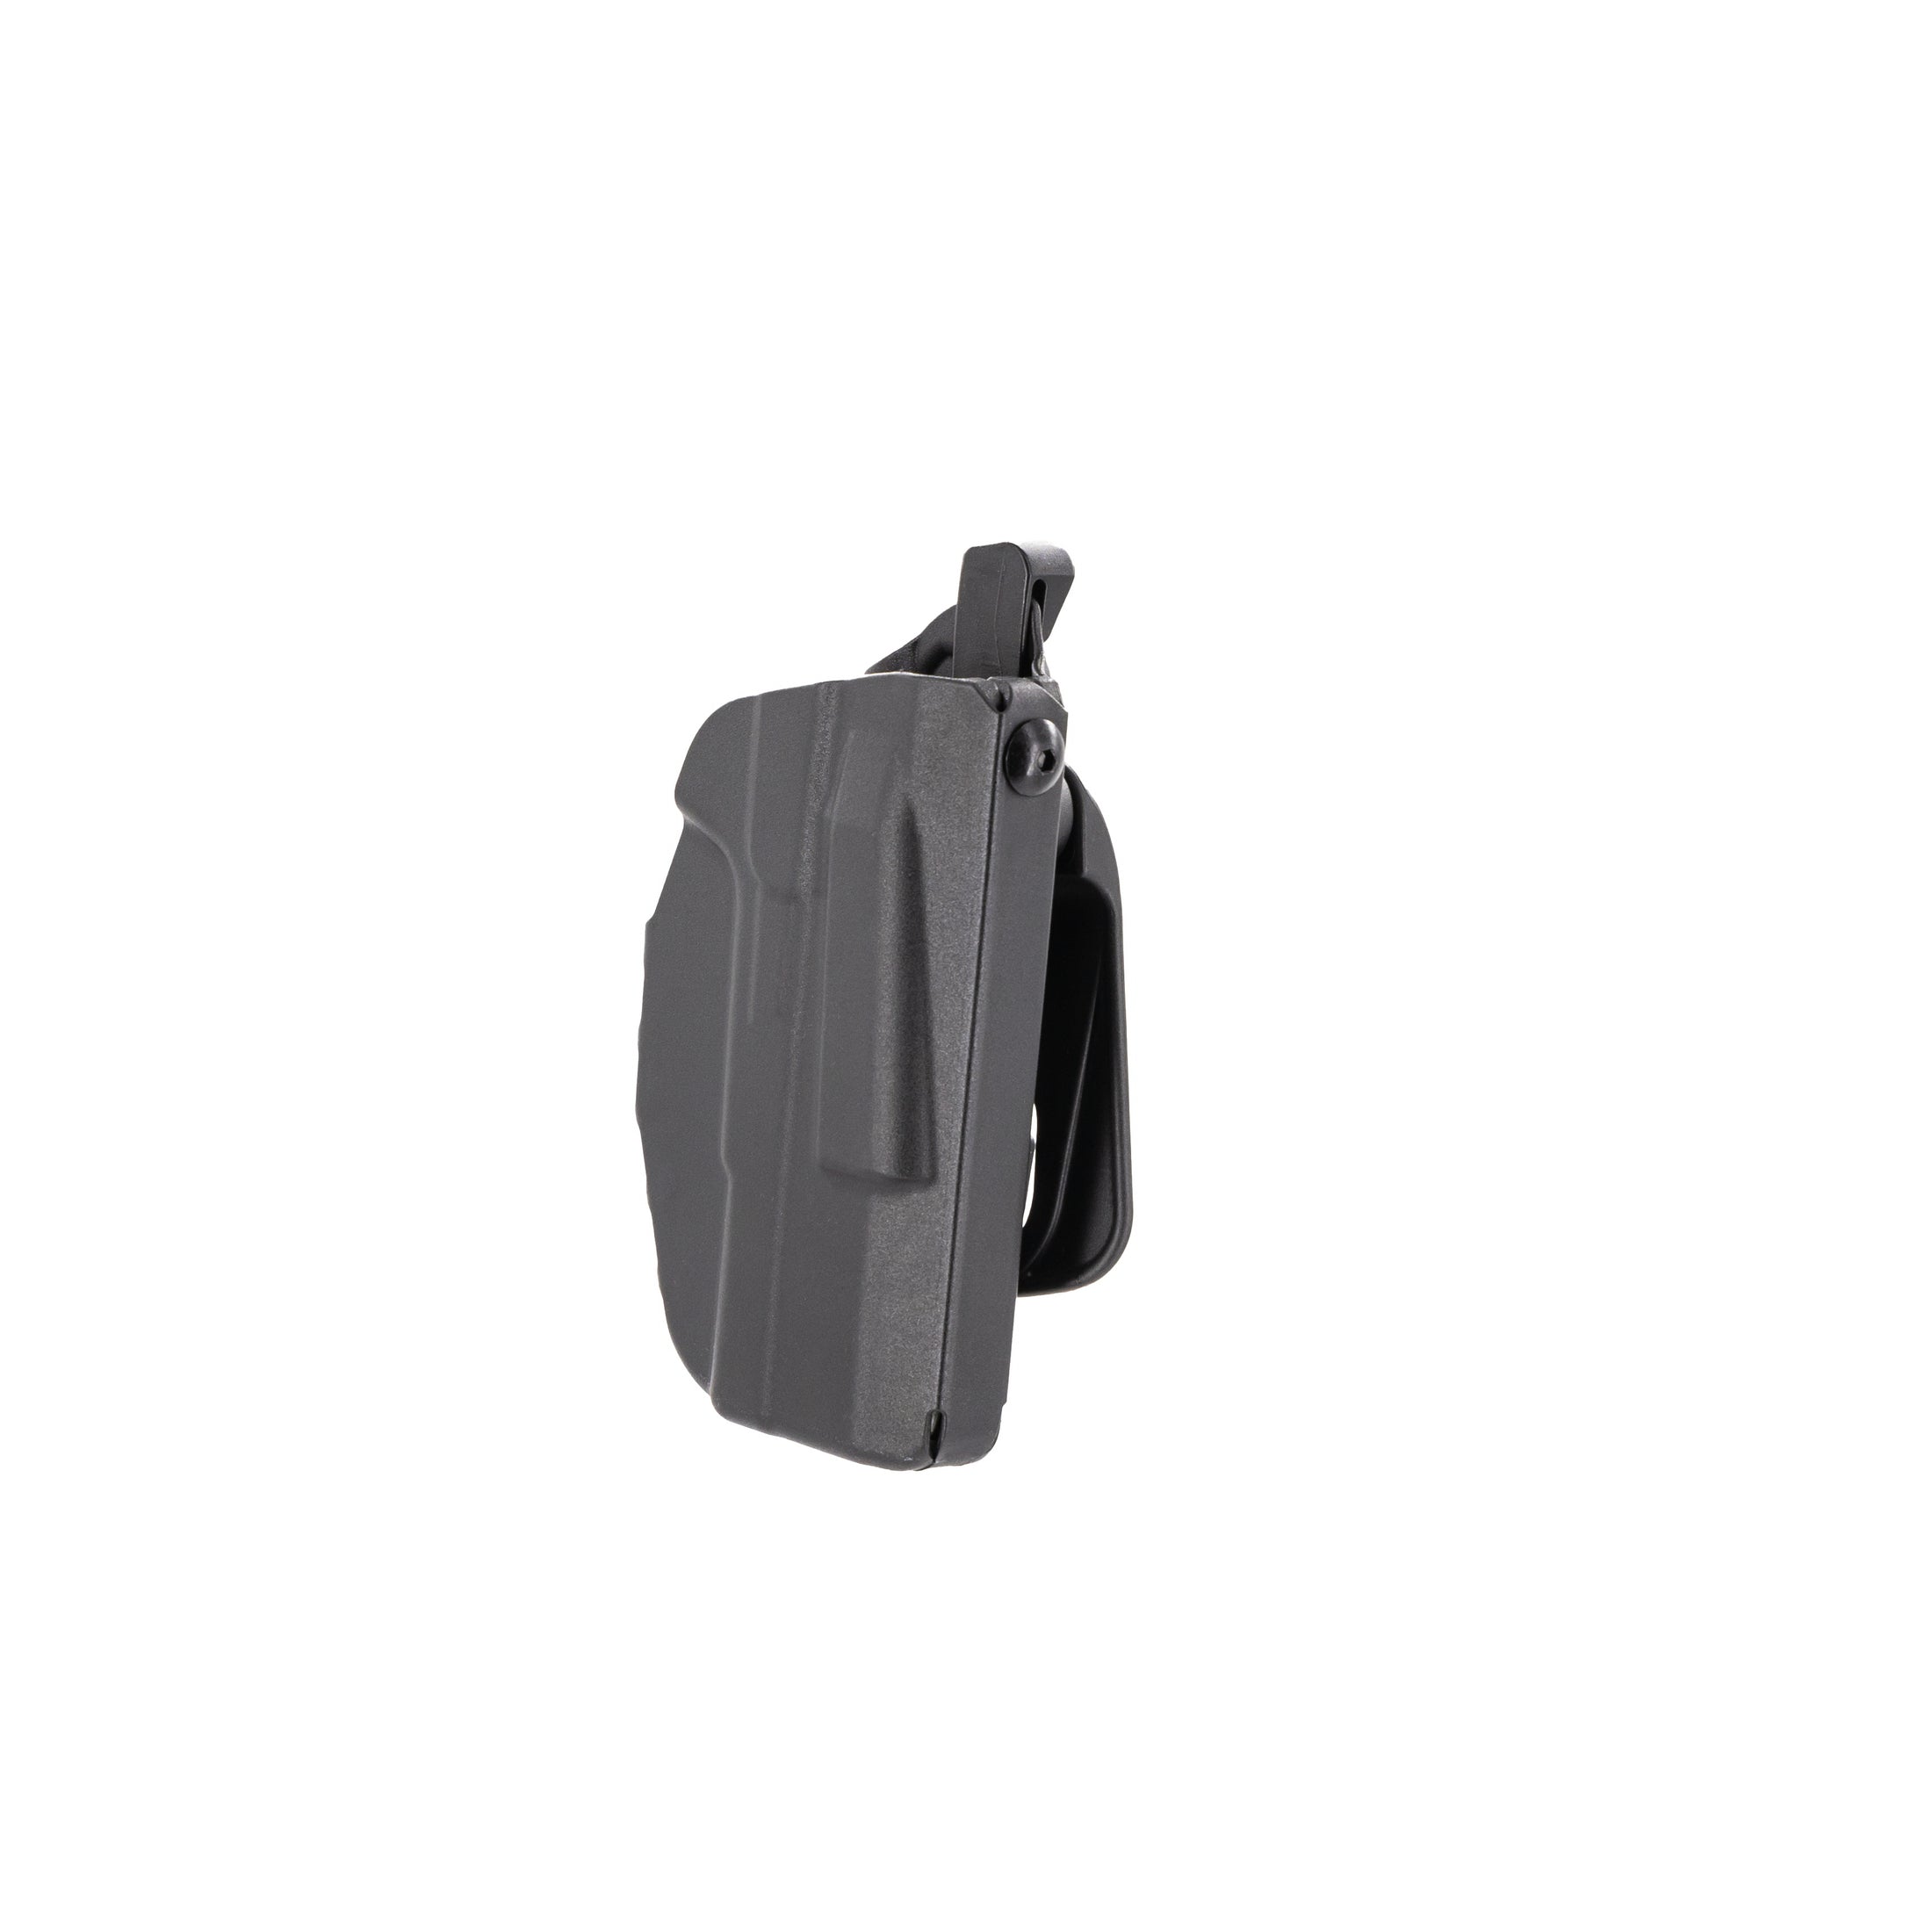 Safariland 7384 7TS ALS OMV Tactical Drop Leg Holster for Glock 19/23 with  TLR-1 or Similar Light MOLLE Right Hand SafariSeven Black [FC-781602135191]  - Cheaper Than Dirt